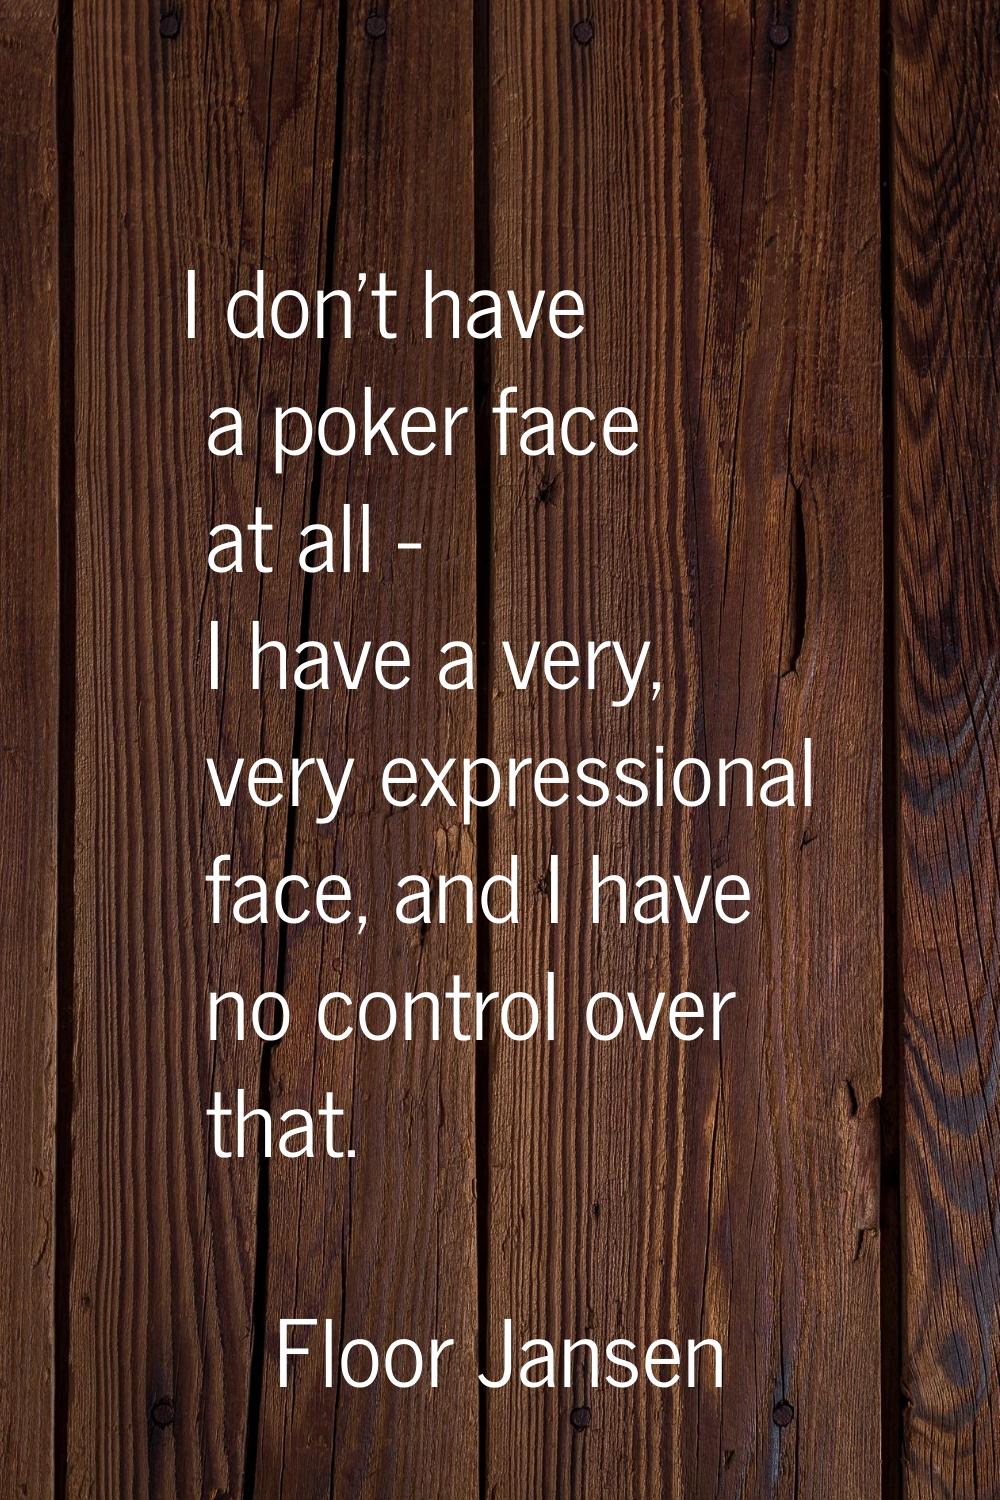 I don't have a poker face at all - I have a very, very expressional face, and I have no control ove